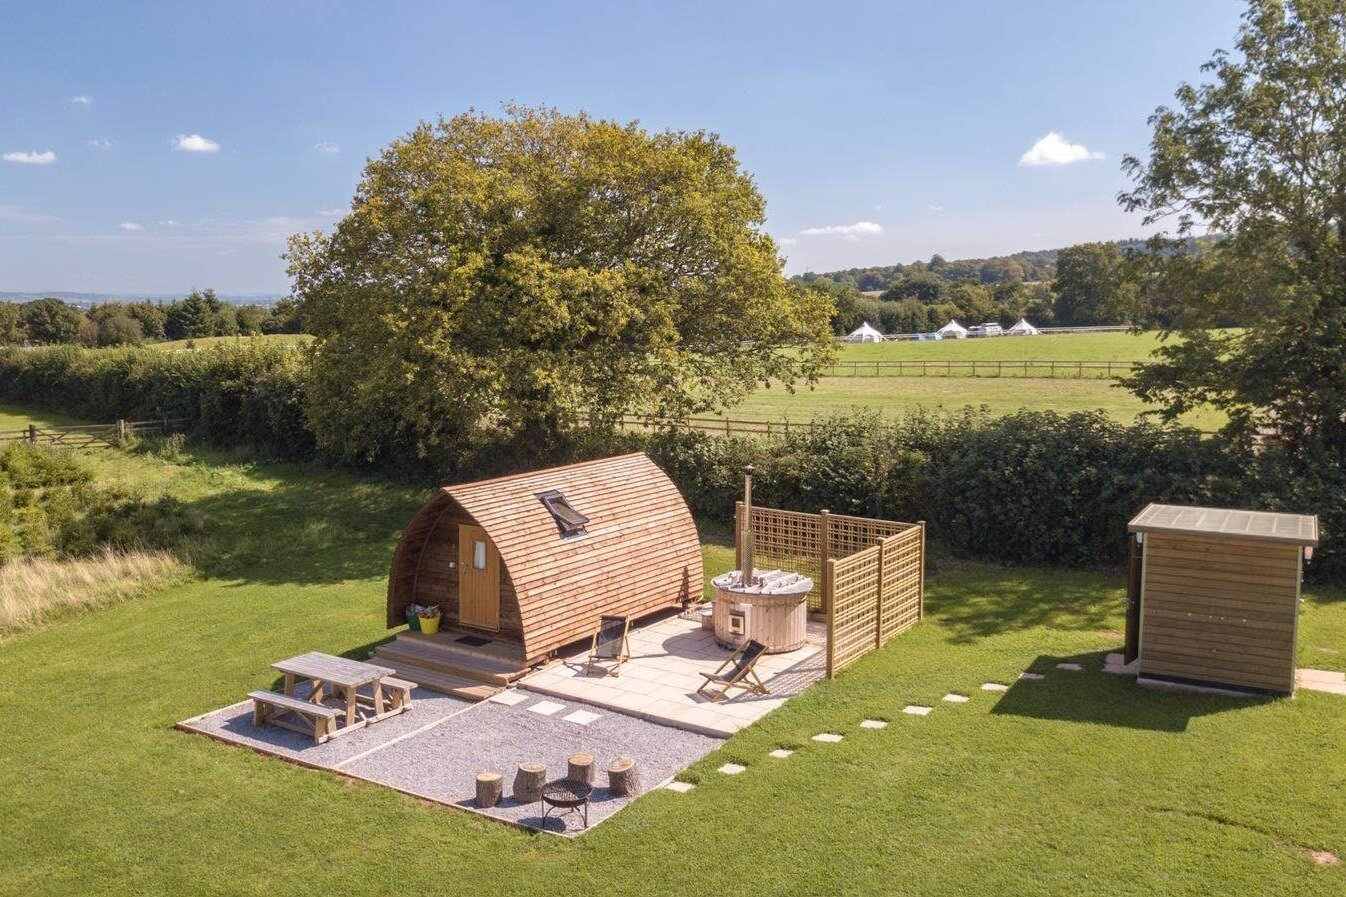 secret-valley-wigwam-pod-on-decking-with-hot-tub-in-field-somerset-glamping